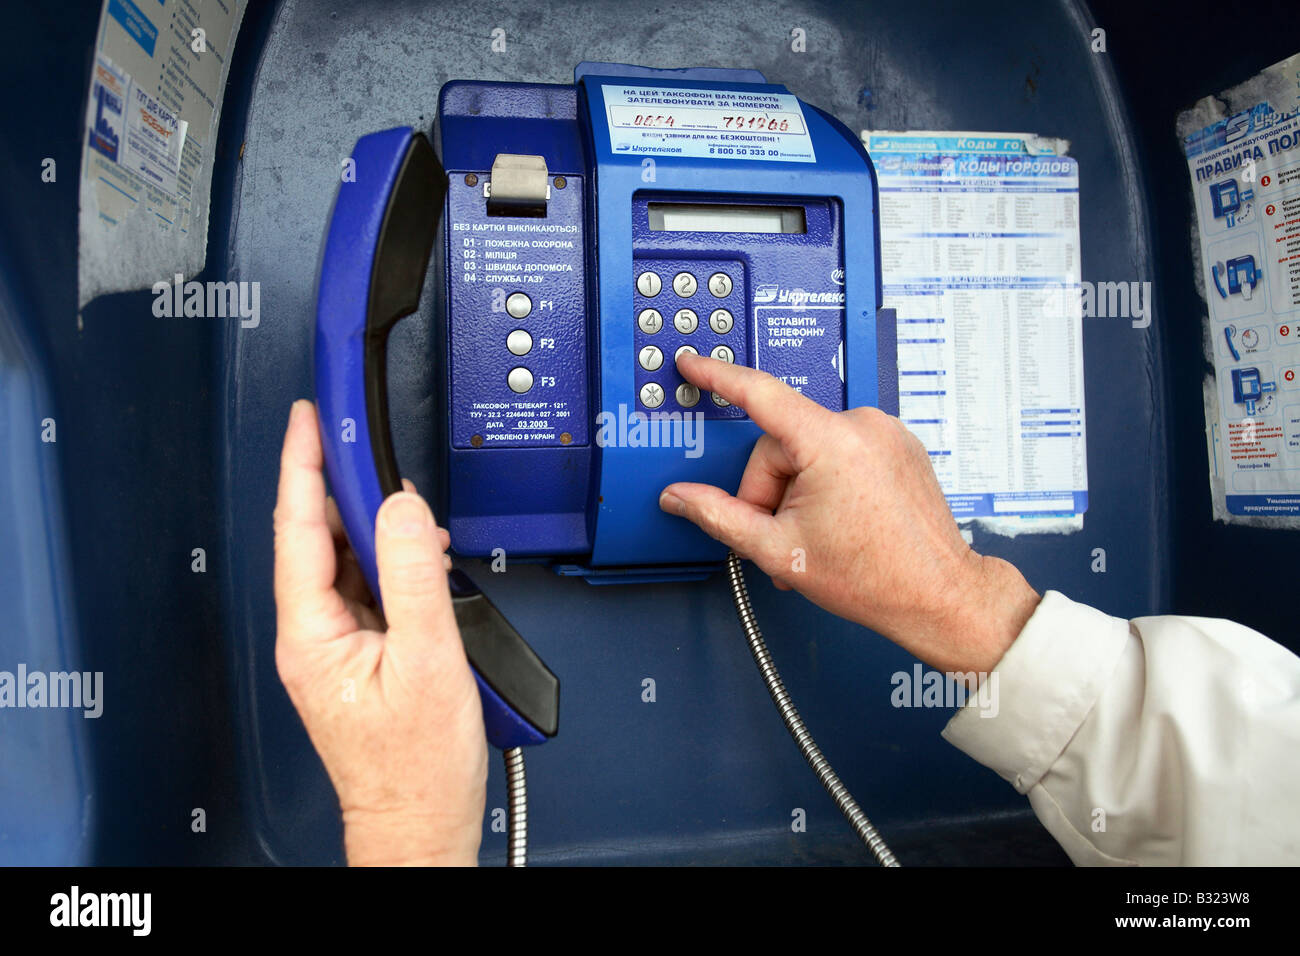 Man dialing a telephone number at a public phone booth, Yalta, Ukraine Stock Photo